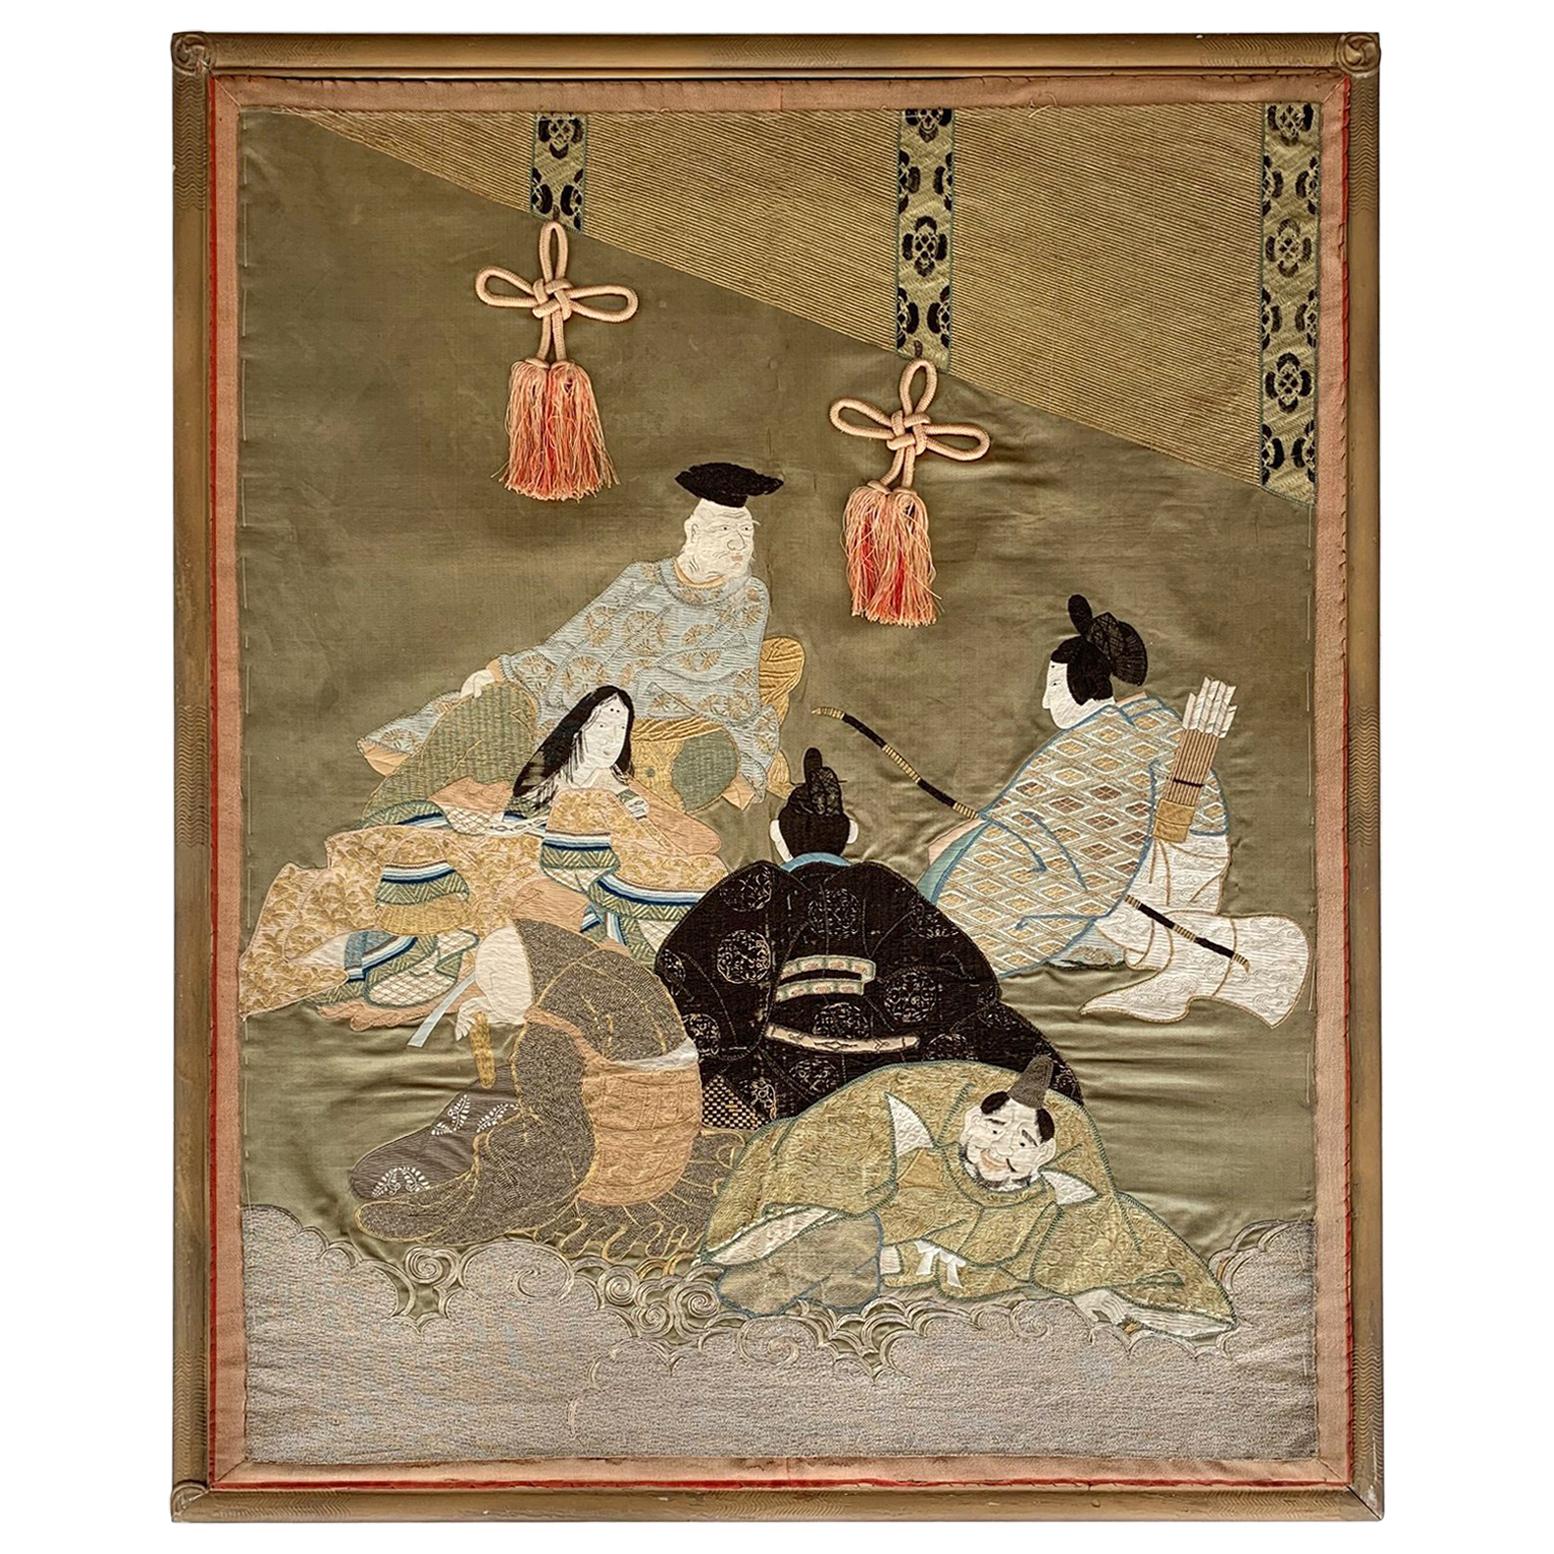 Framed Japanese Embroidery Textile Art from Meiji Period